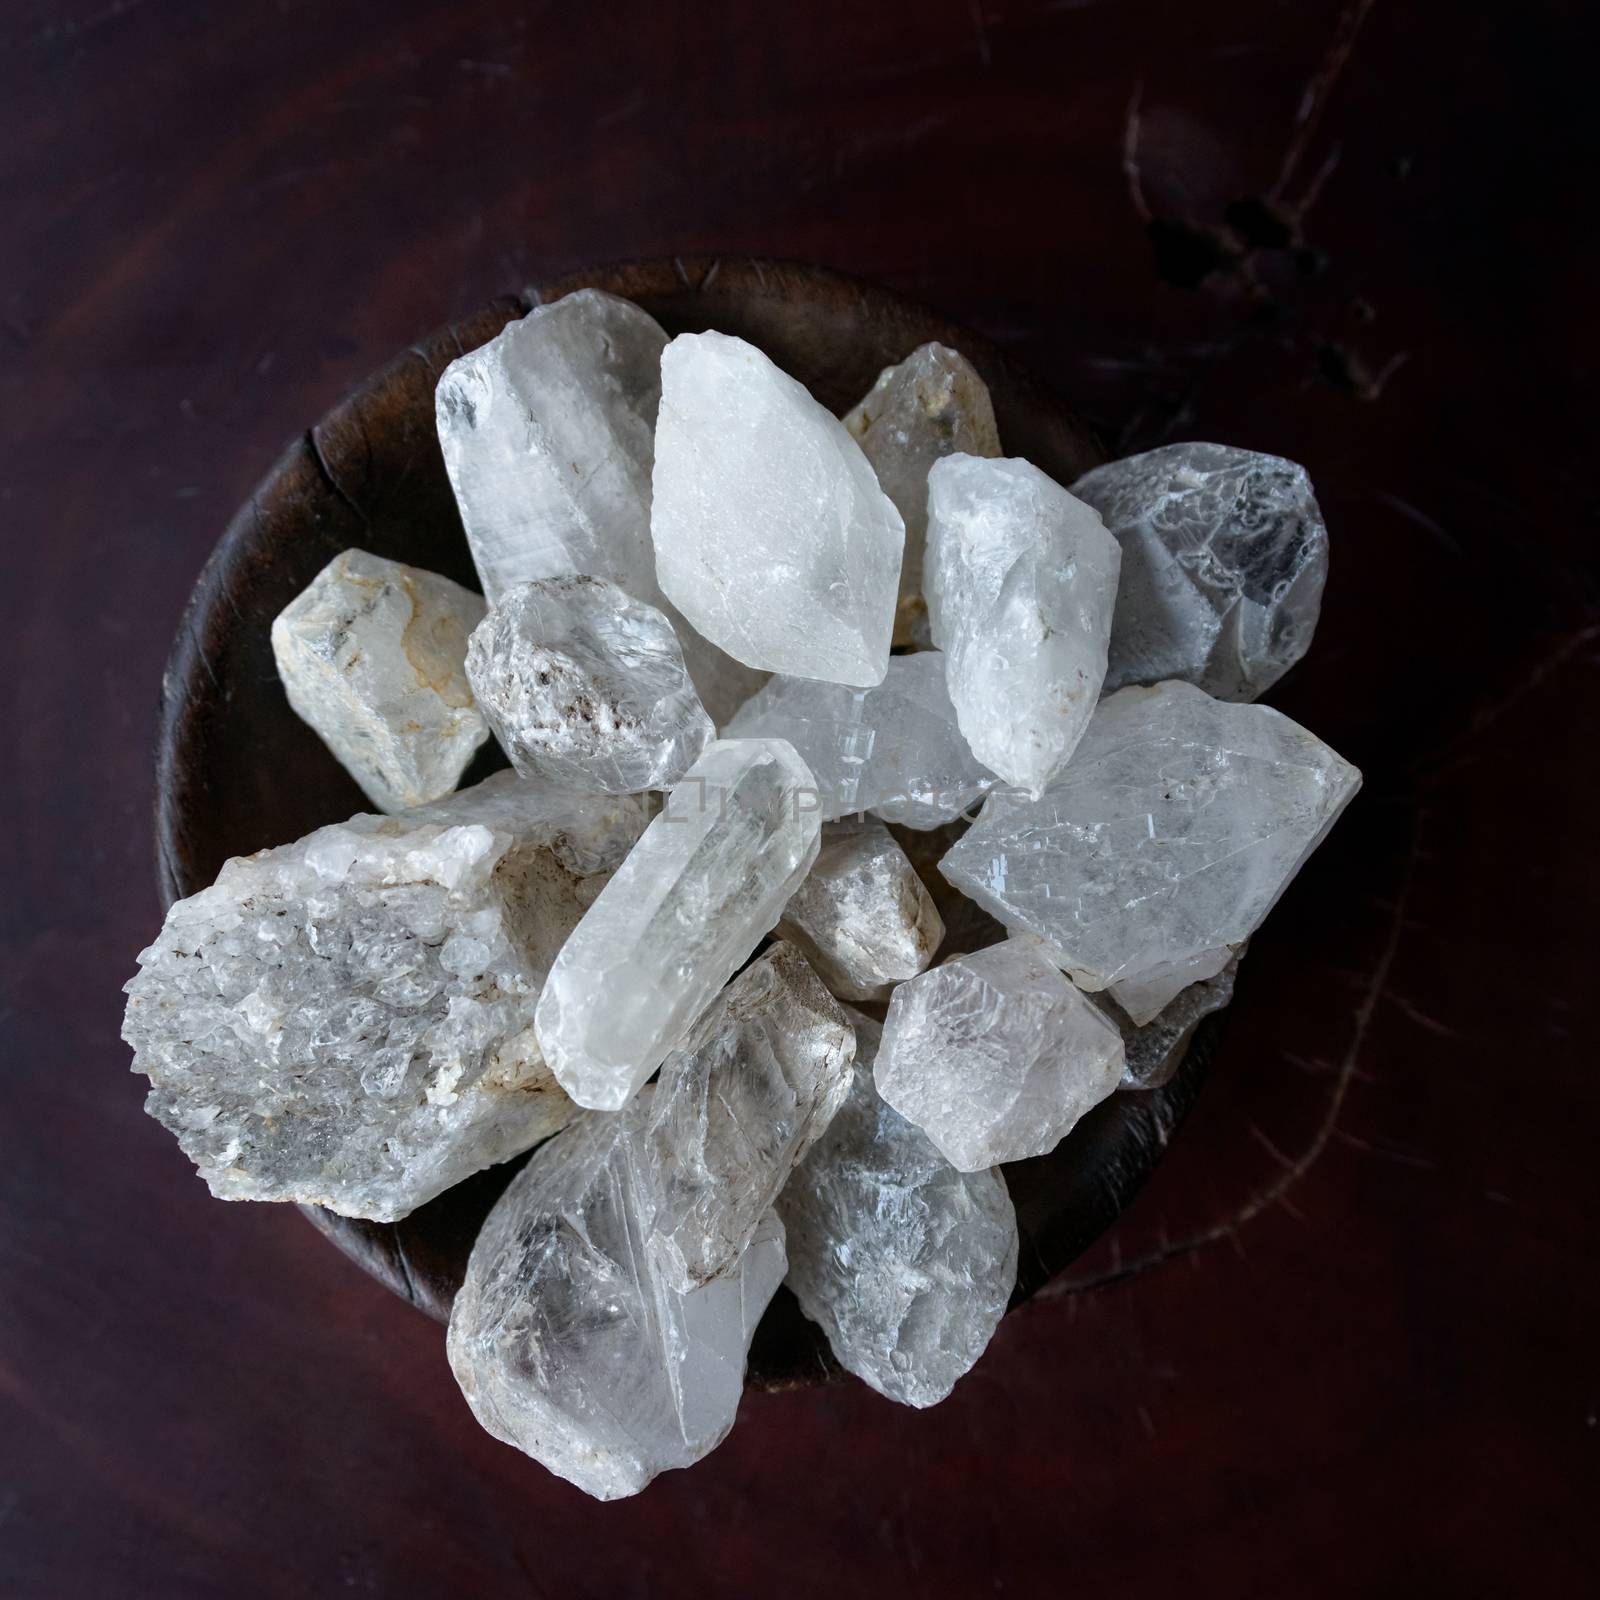 Crystals in a bowl by dutourdumonde